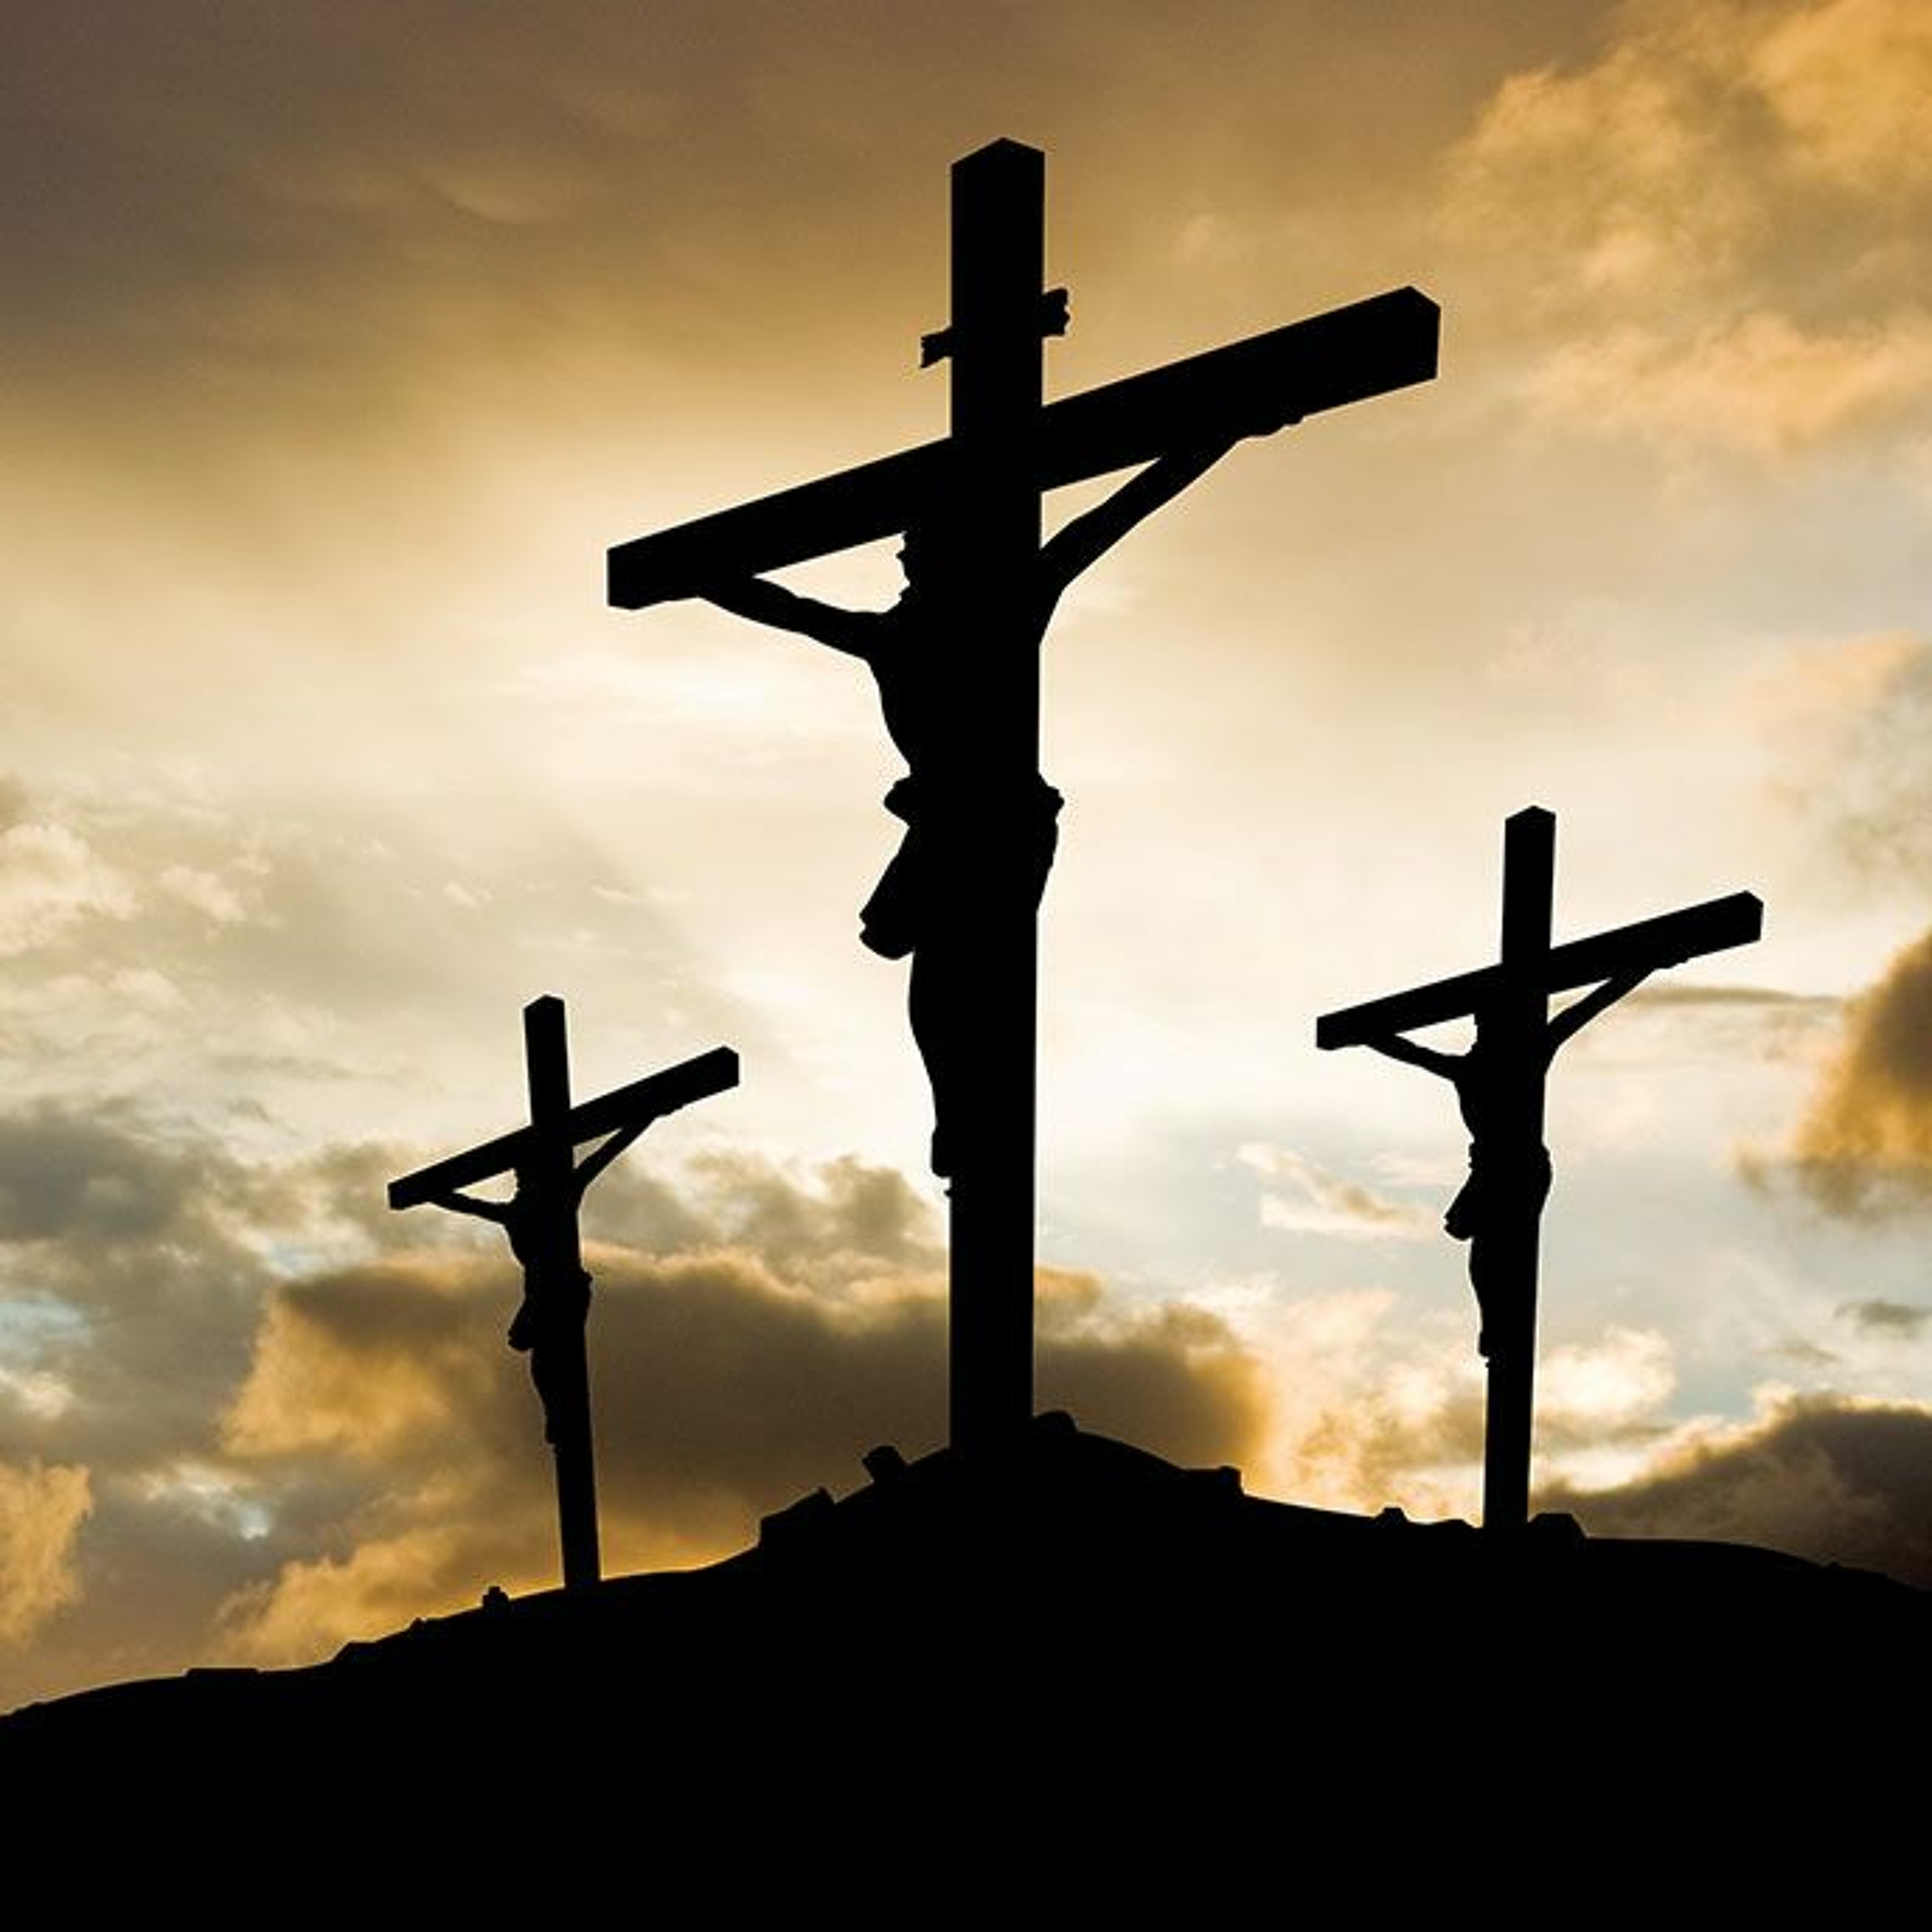 4 Reasons why Latter-day Saints should reverence and study the Crucifixion more